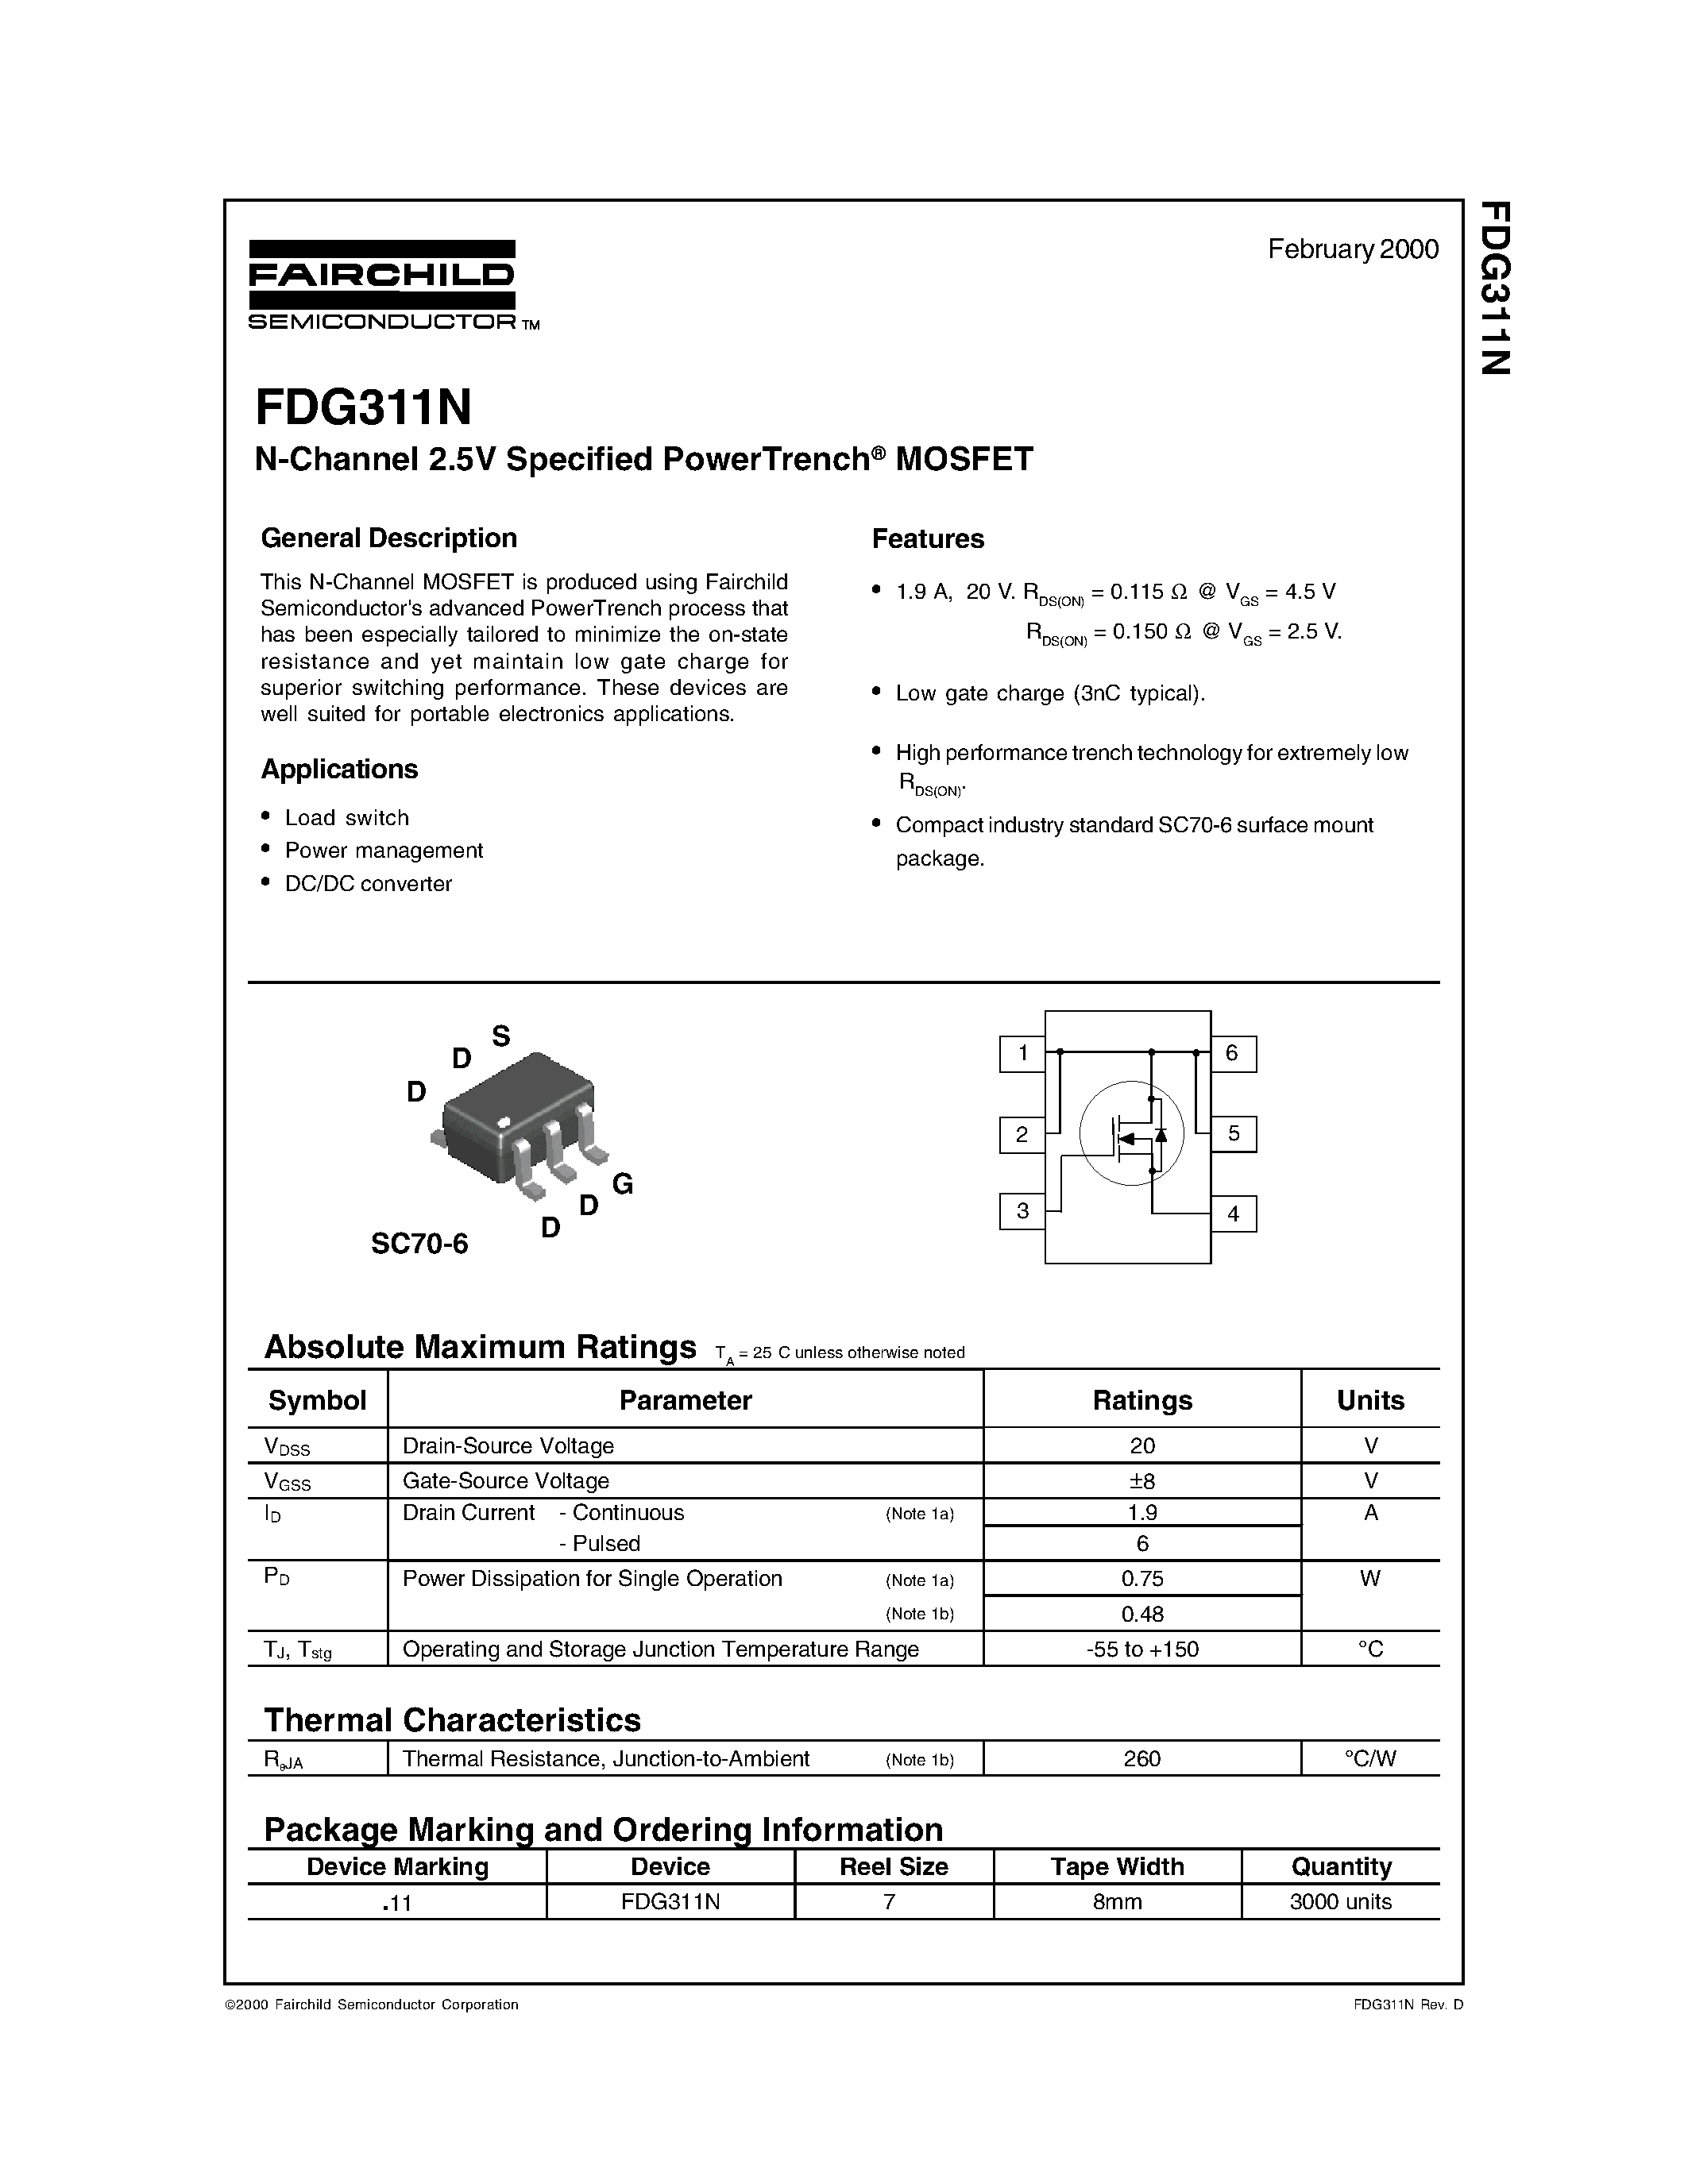 Даташит FDG311N - N-Channel 2.5V Specified PowerTrench MOSFET страница 1